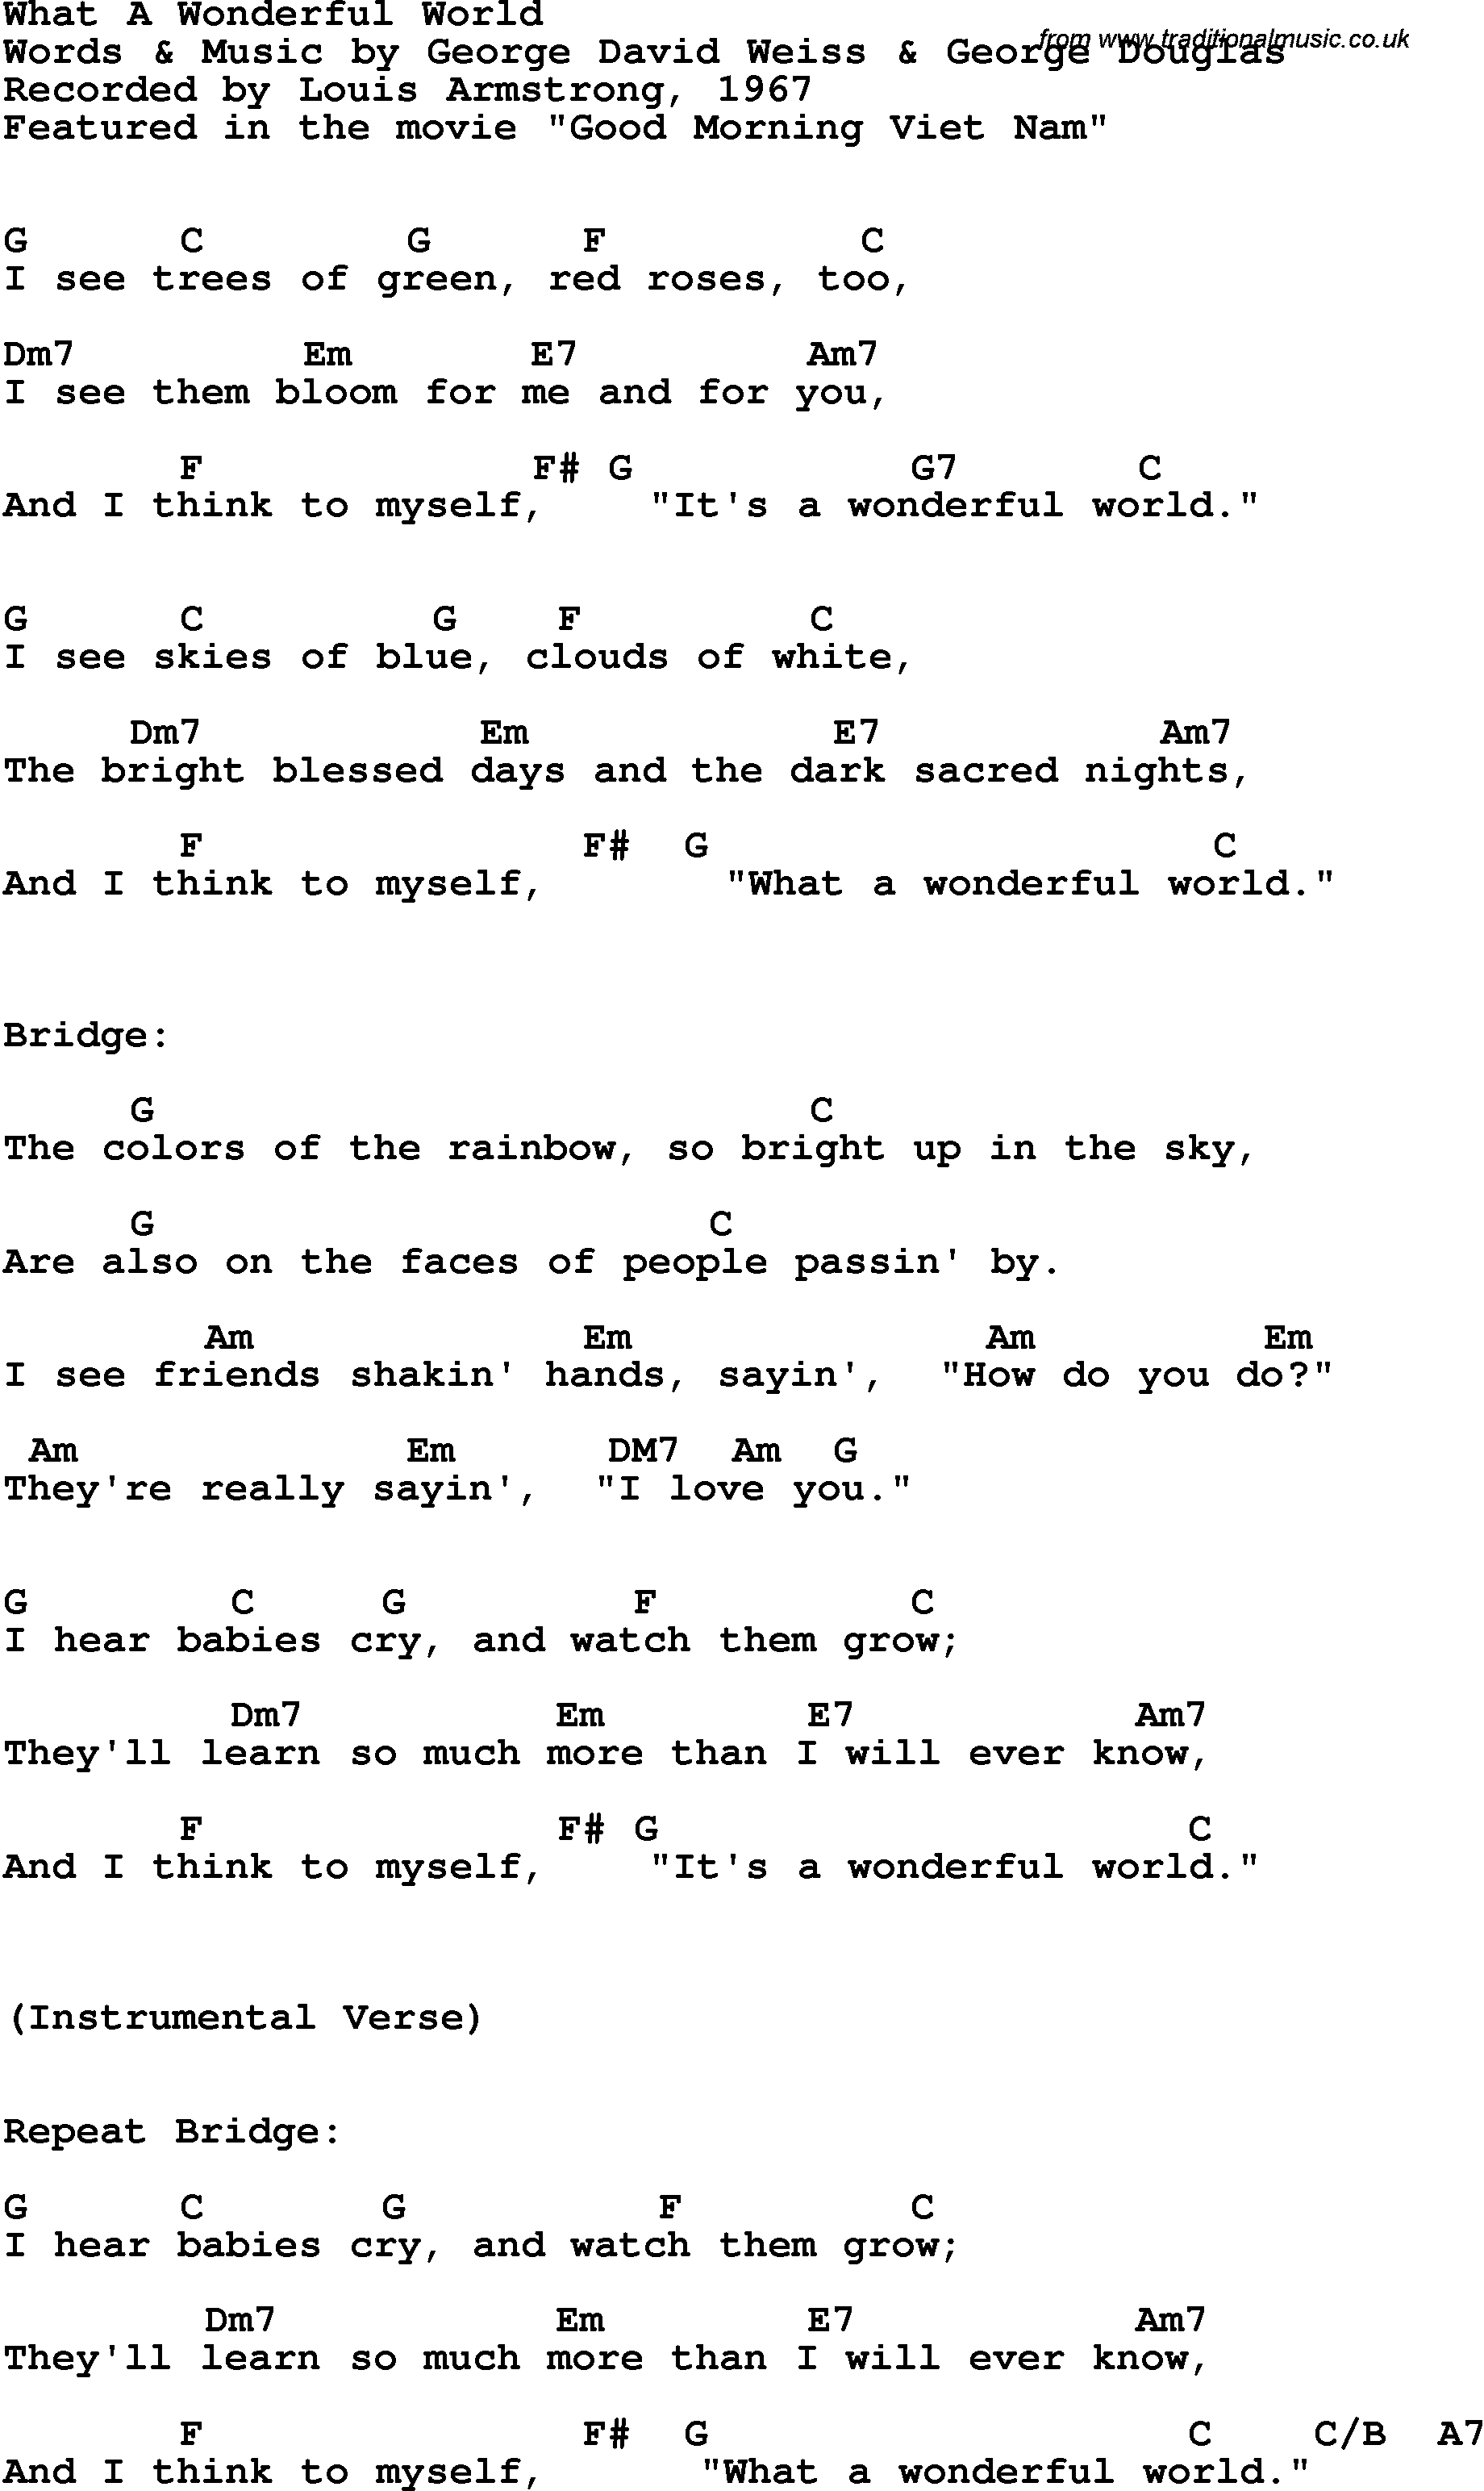 What A Wonderful World Chords Song Lyrics With Guitar Chords For What A Wonderful World Louis